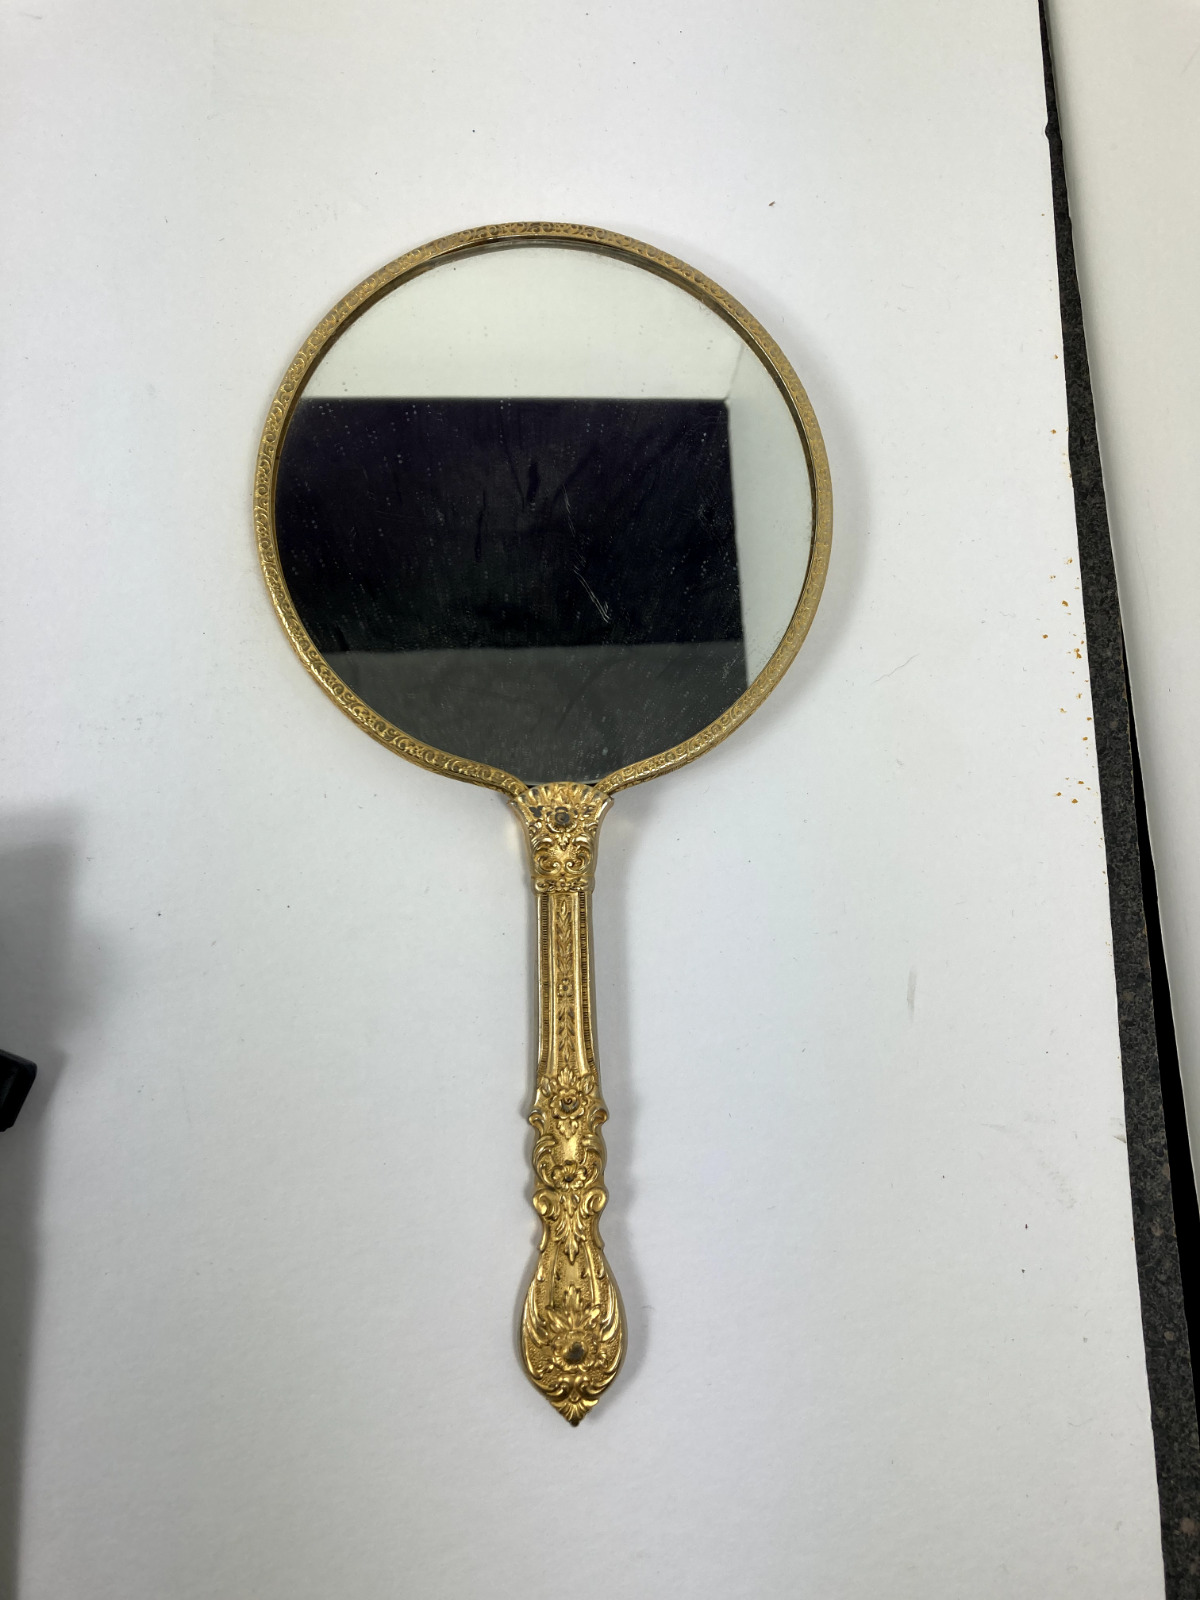 Vintage Hand Held Mirror 2 Sided Gold Color Ornate